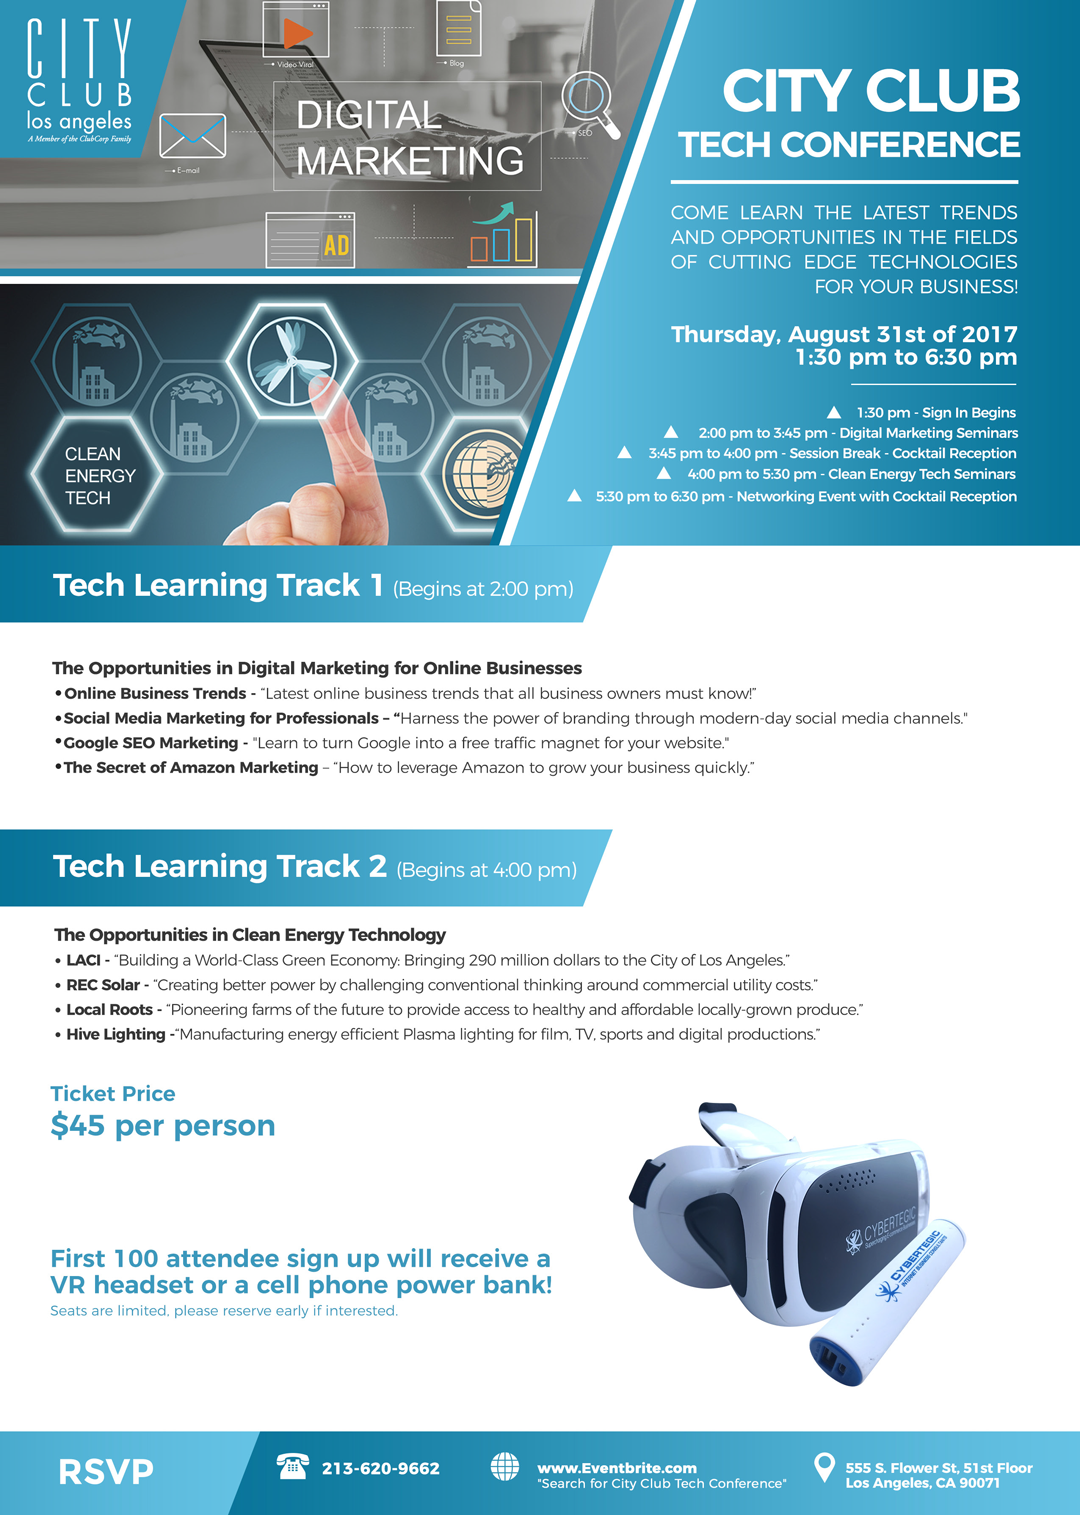 City Club Tech Conference Flyer 08252017